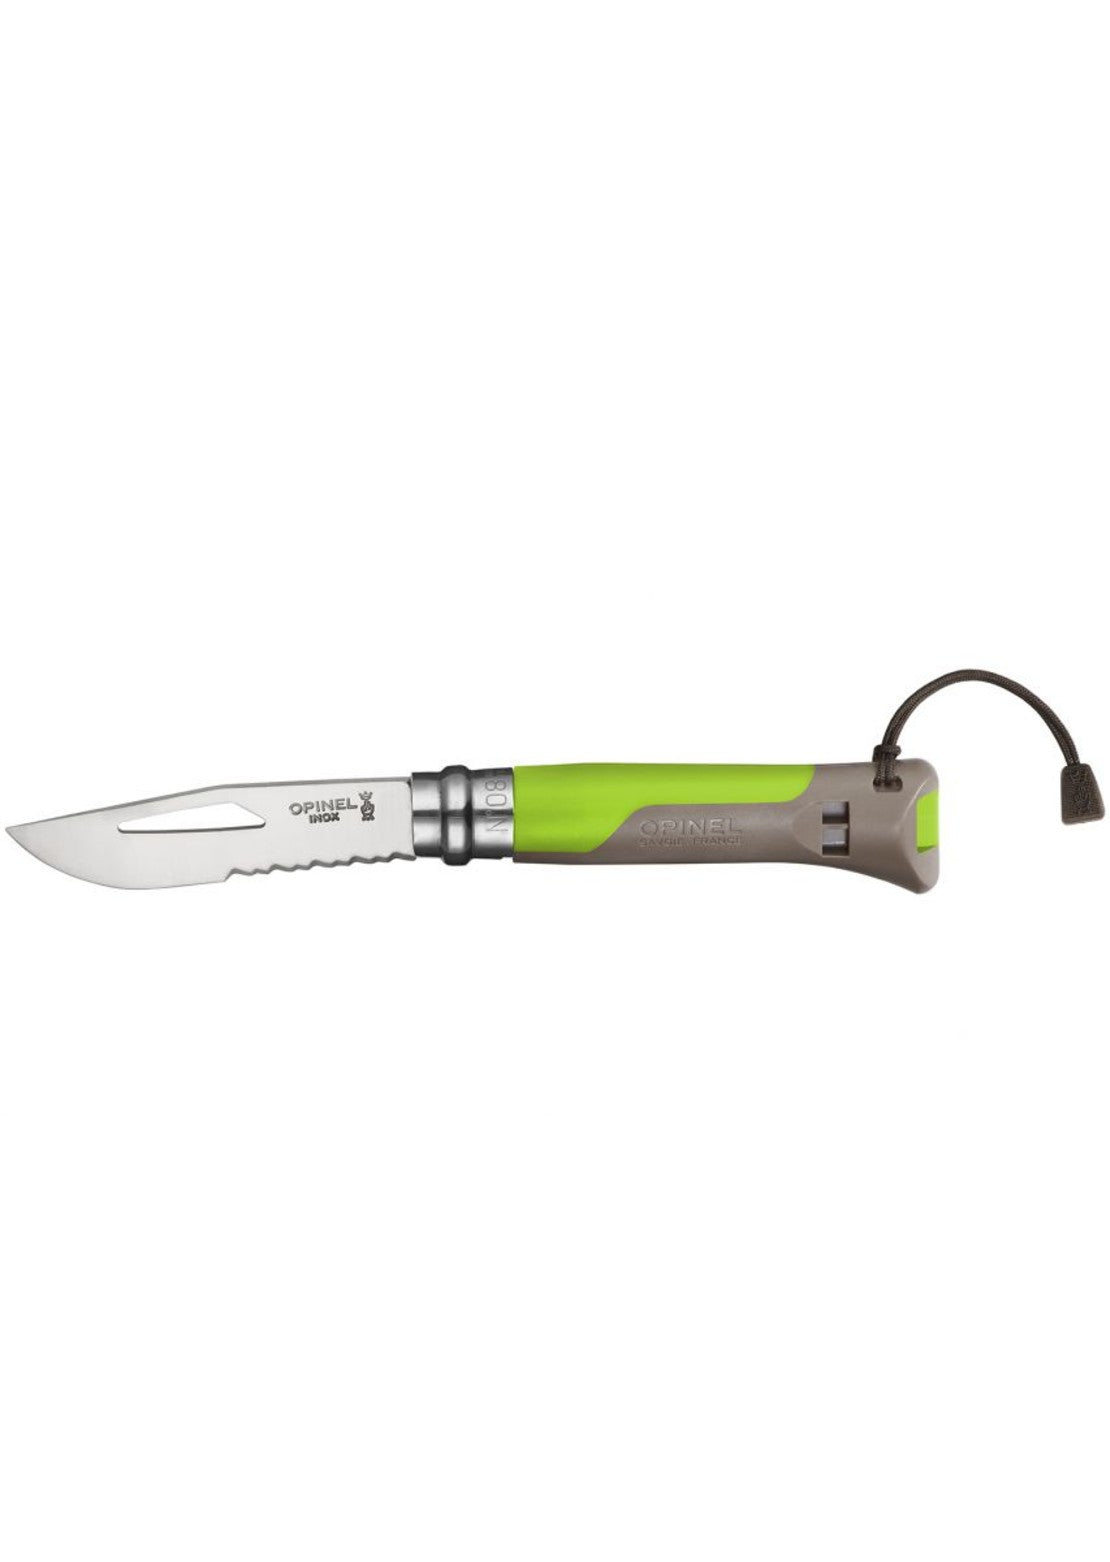 Opinel Tradition Multifunction N°08 Outdoor Sports Knife